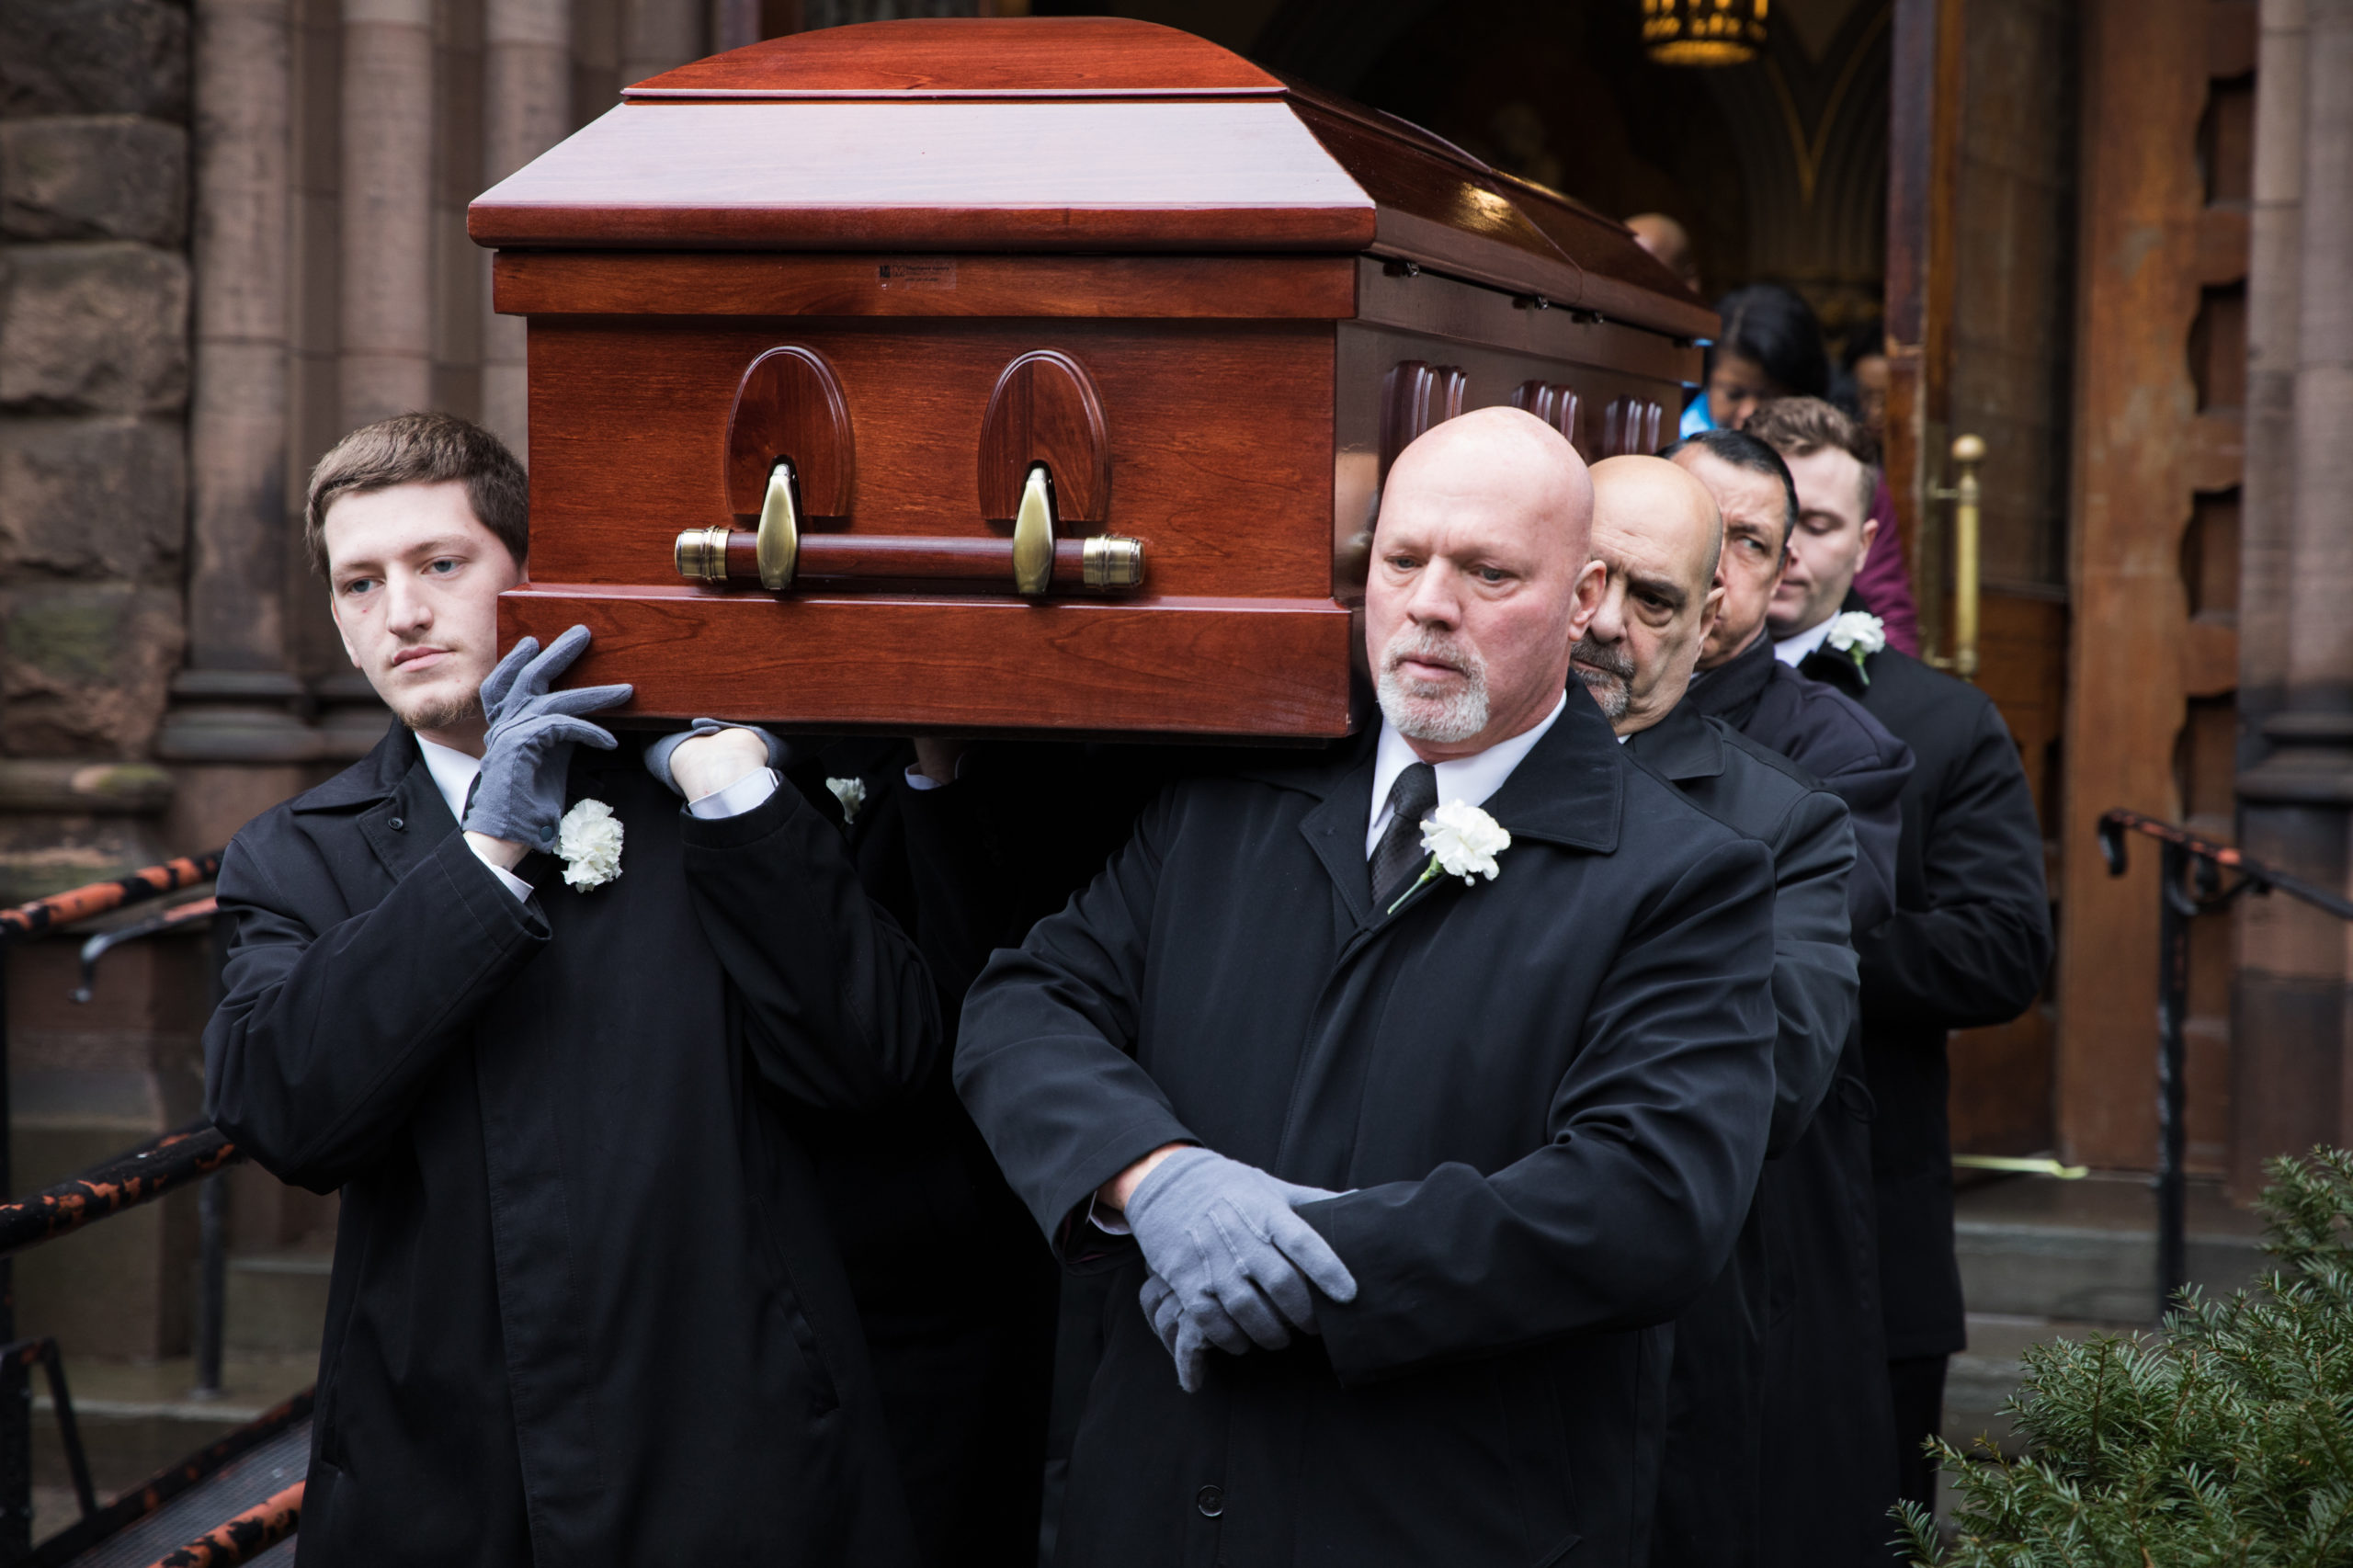 Pallbearers bring the casket to the hearse to bring it to Green-Wood Cemetery. 